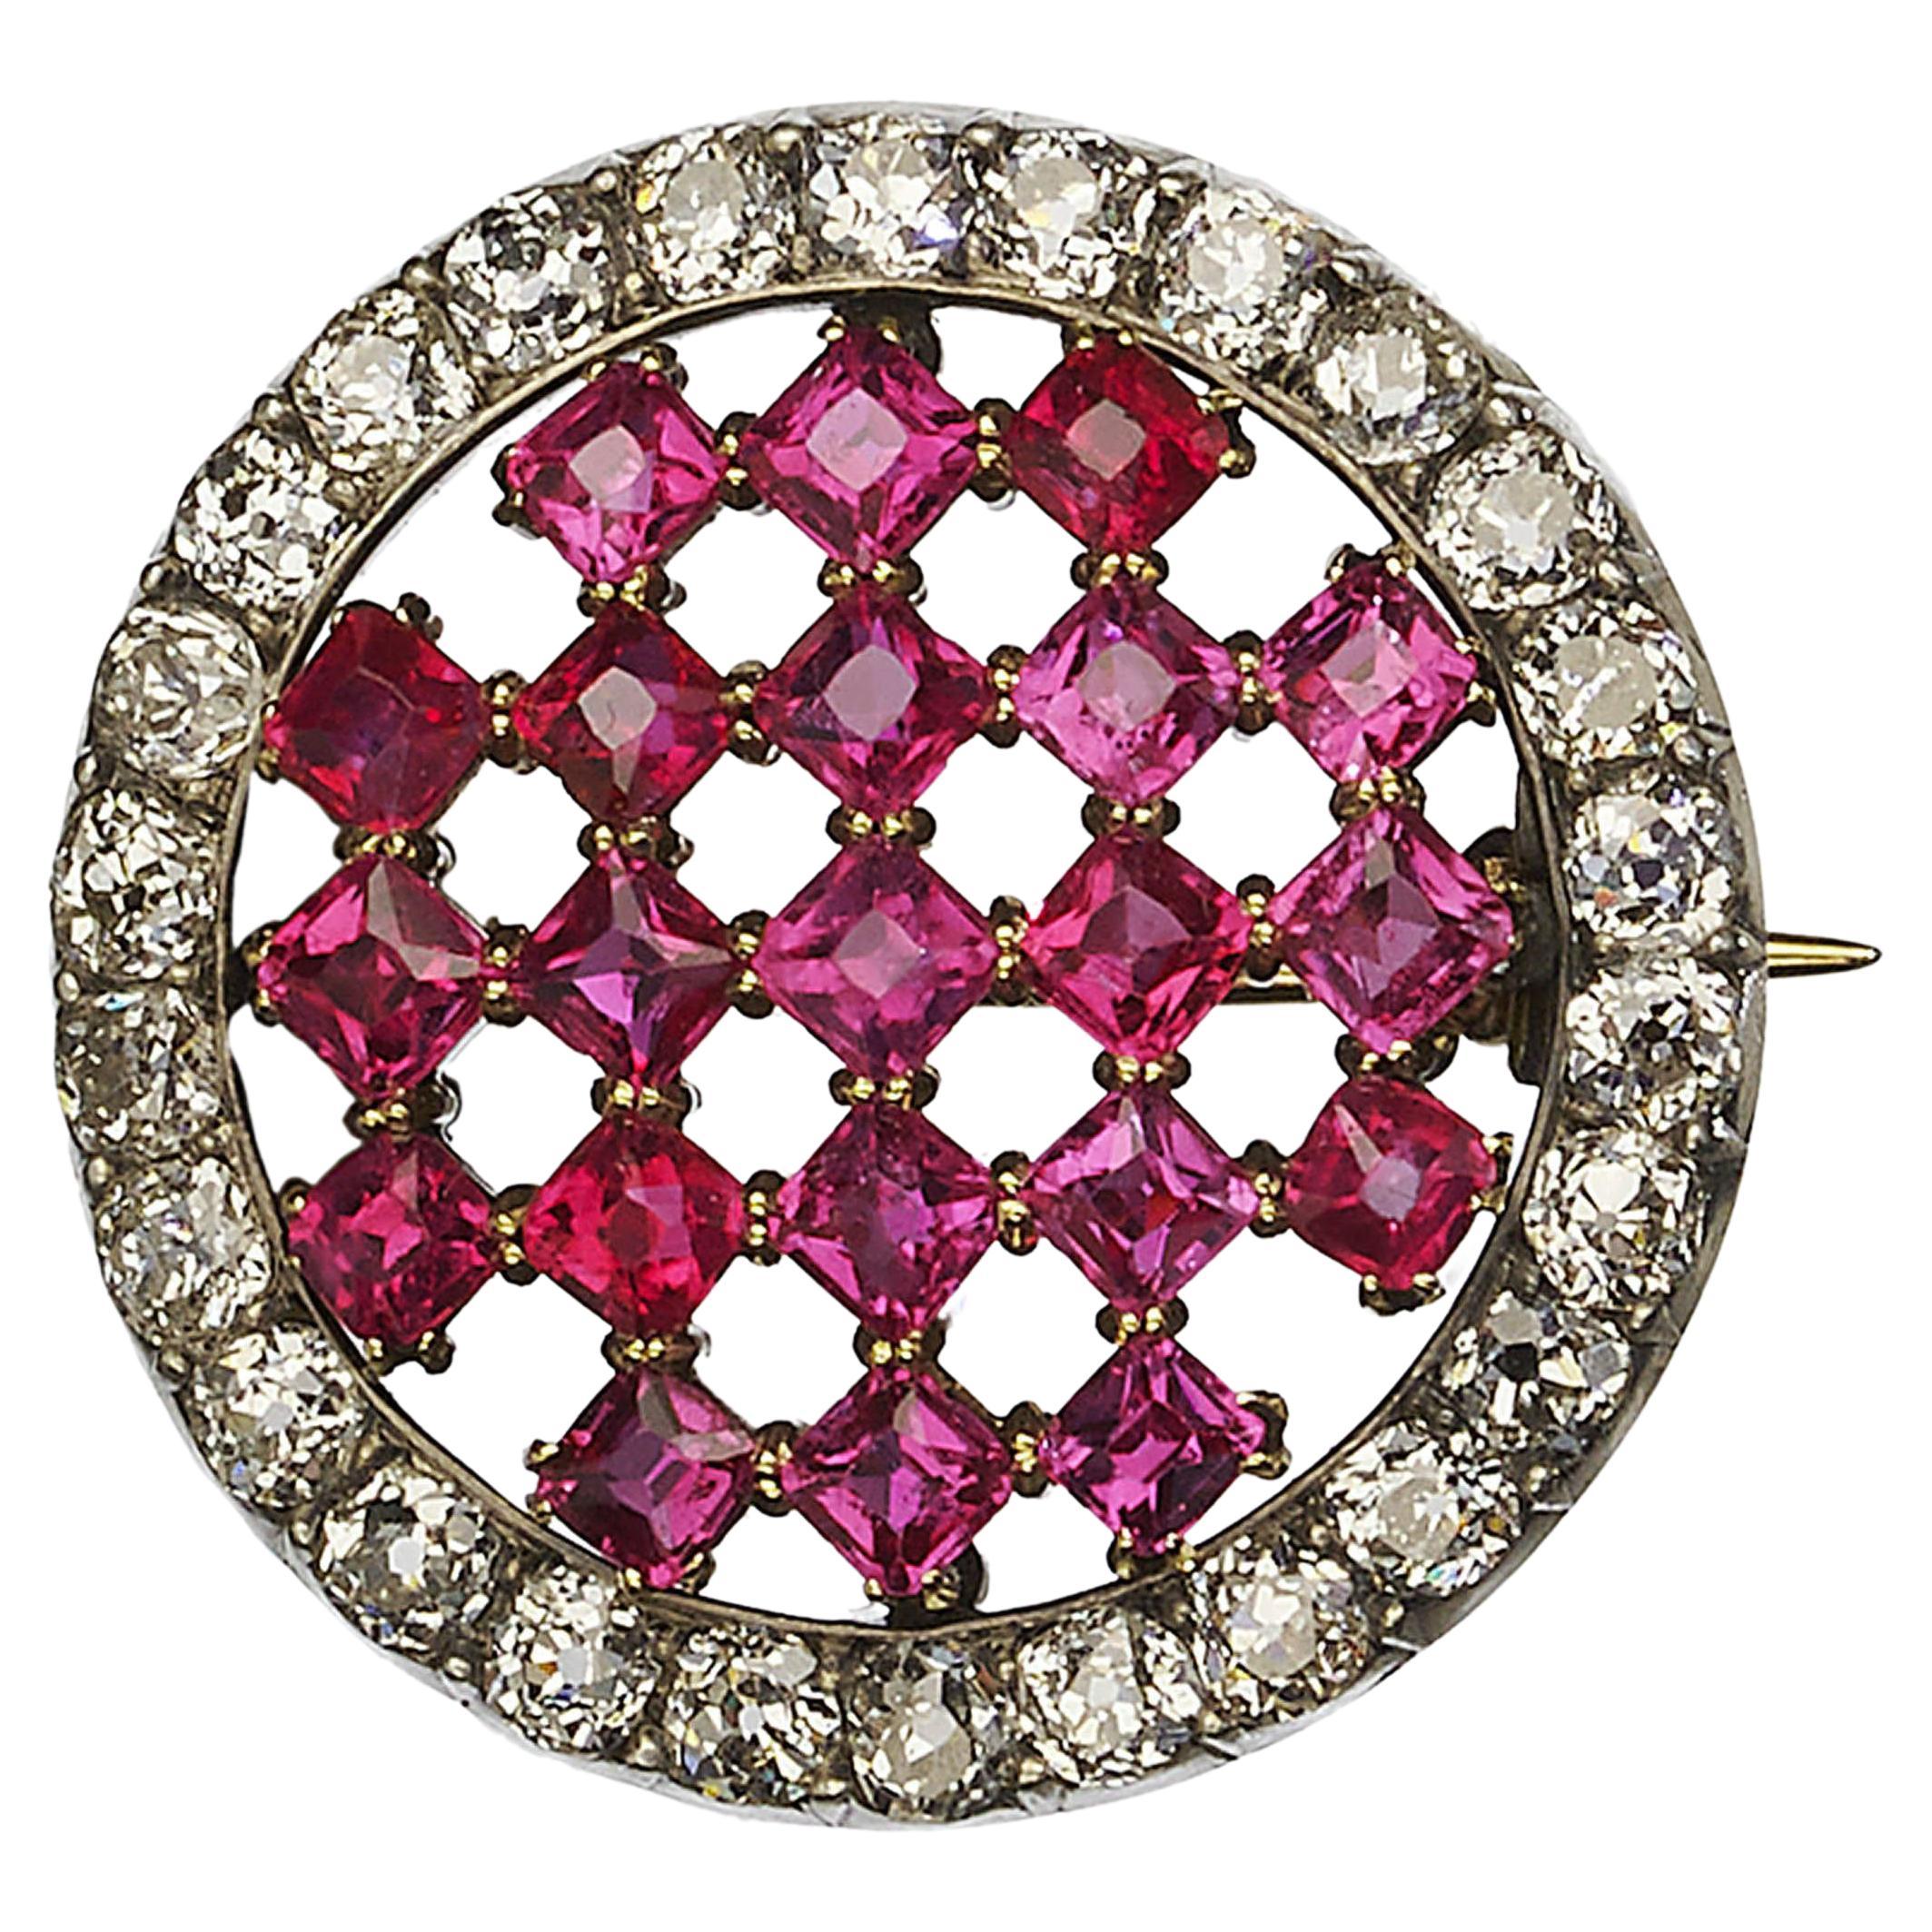 Antique Austrian Burma Ruby, Diamond and Silver-Upon-Gold Brooch, Circa 1890 For Sale